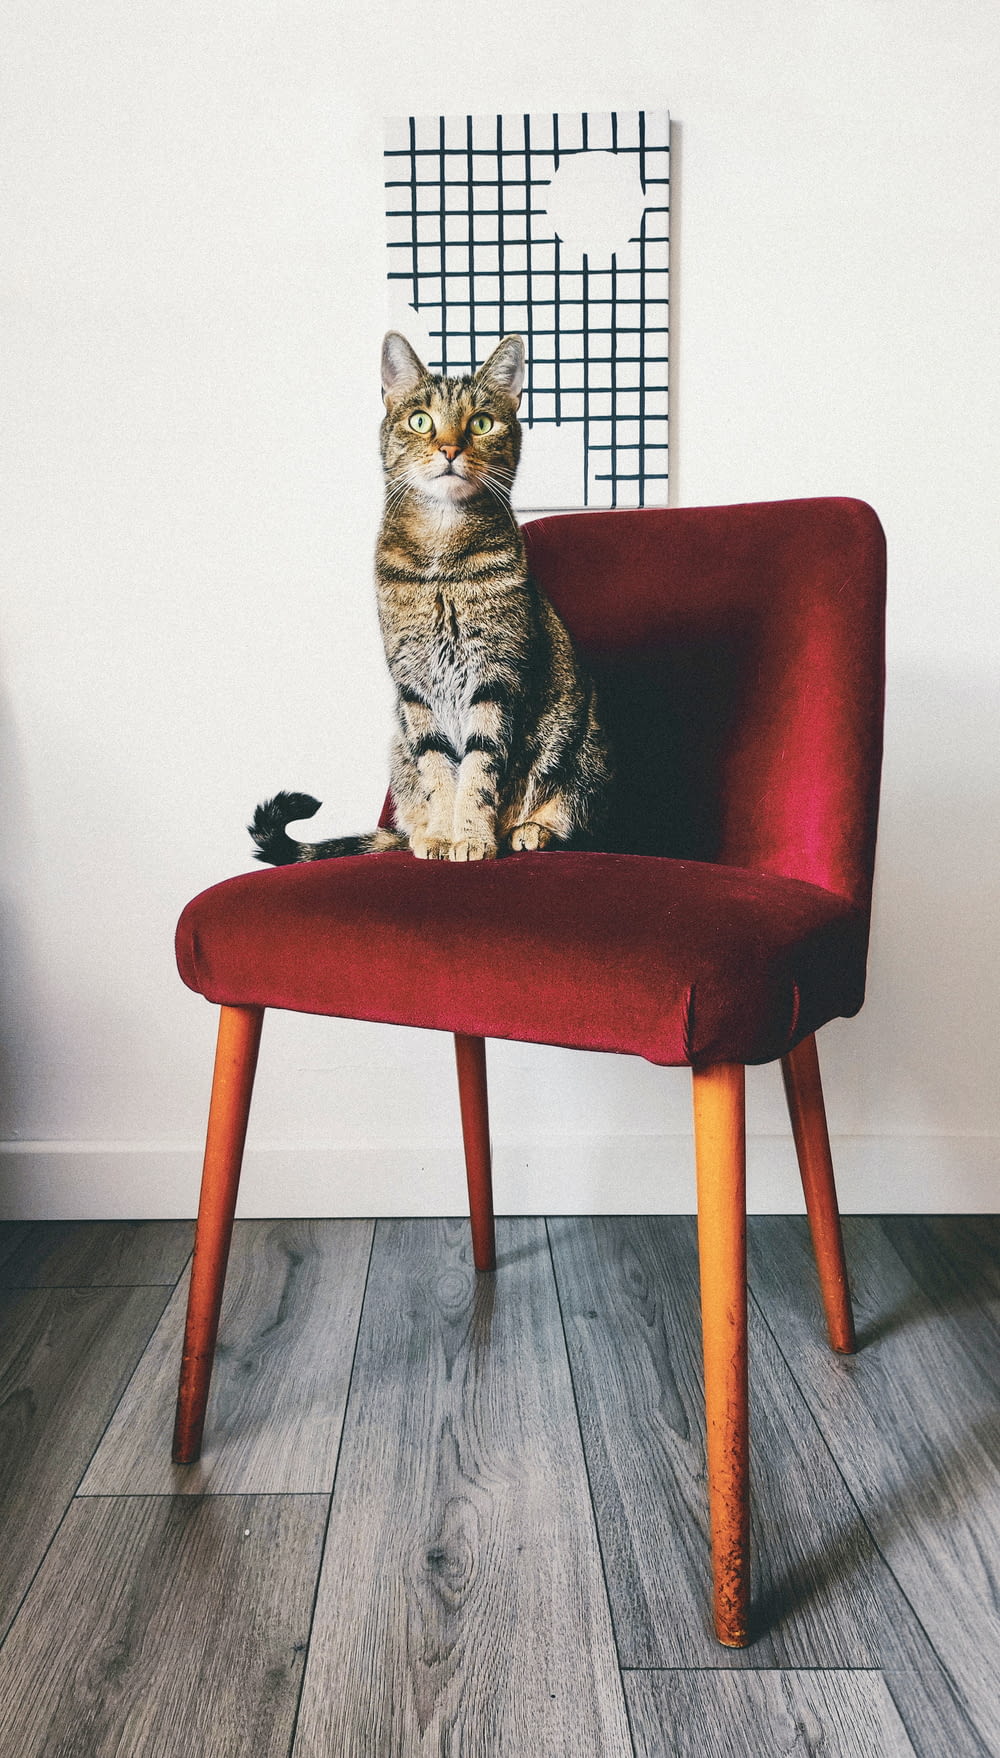 a cat sitting on a chair in a room